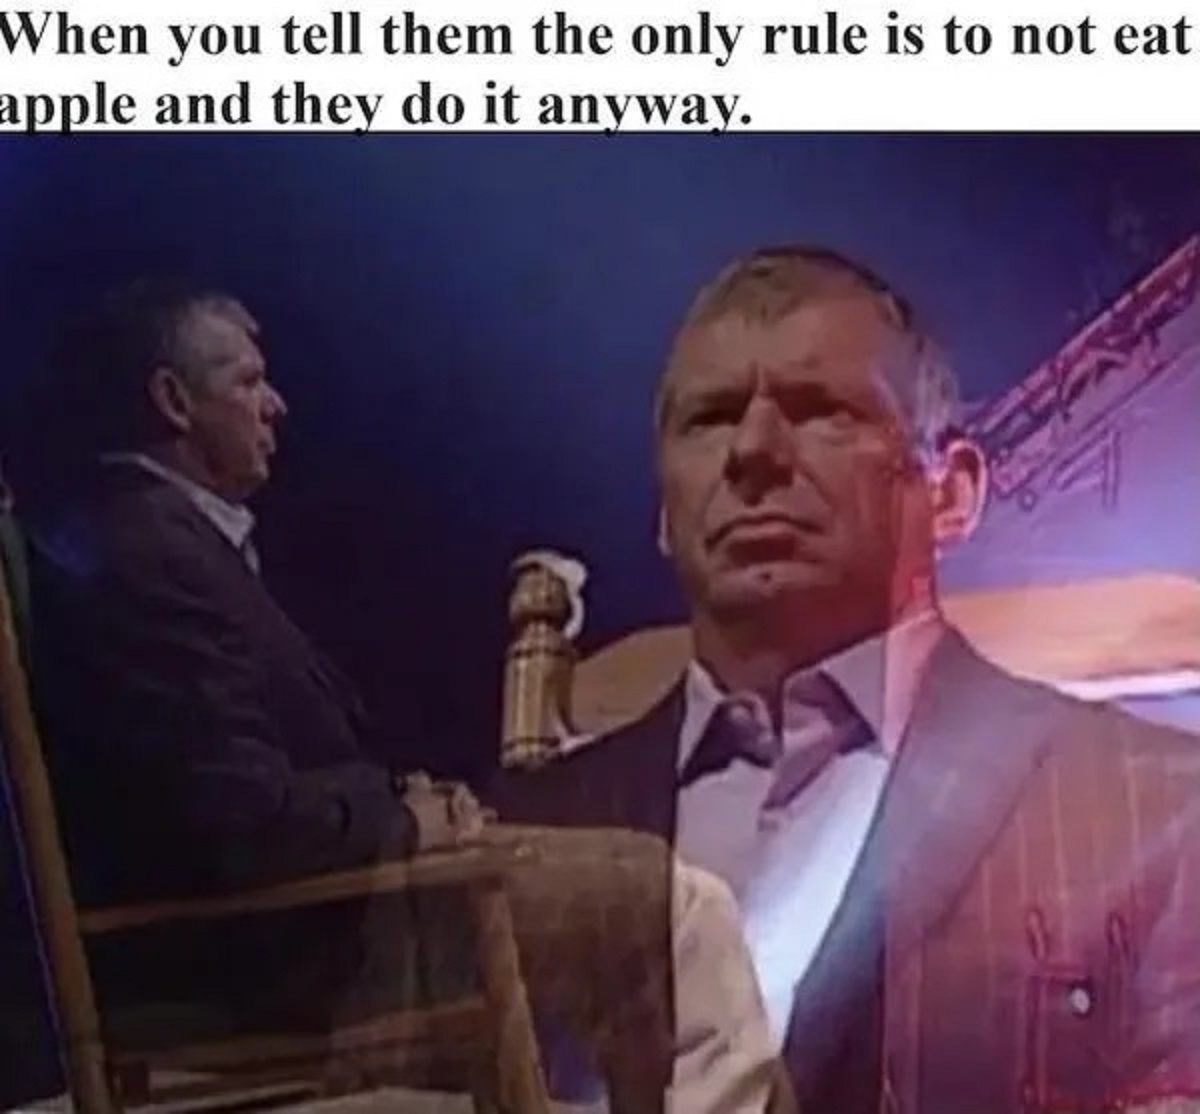 Vince McMahon - When you tell them the only rule is to not eat apple and they do it anyway.